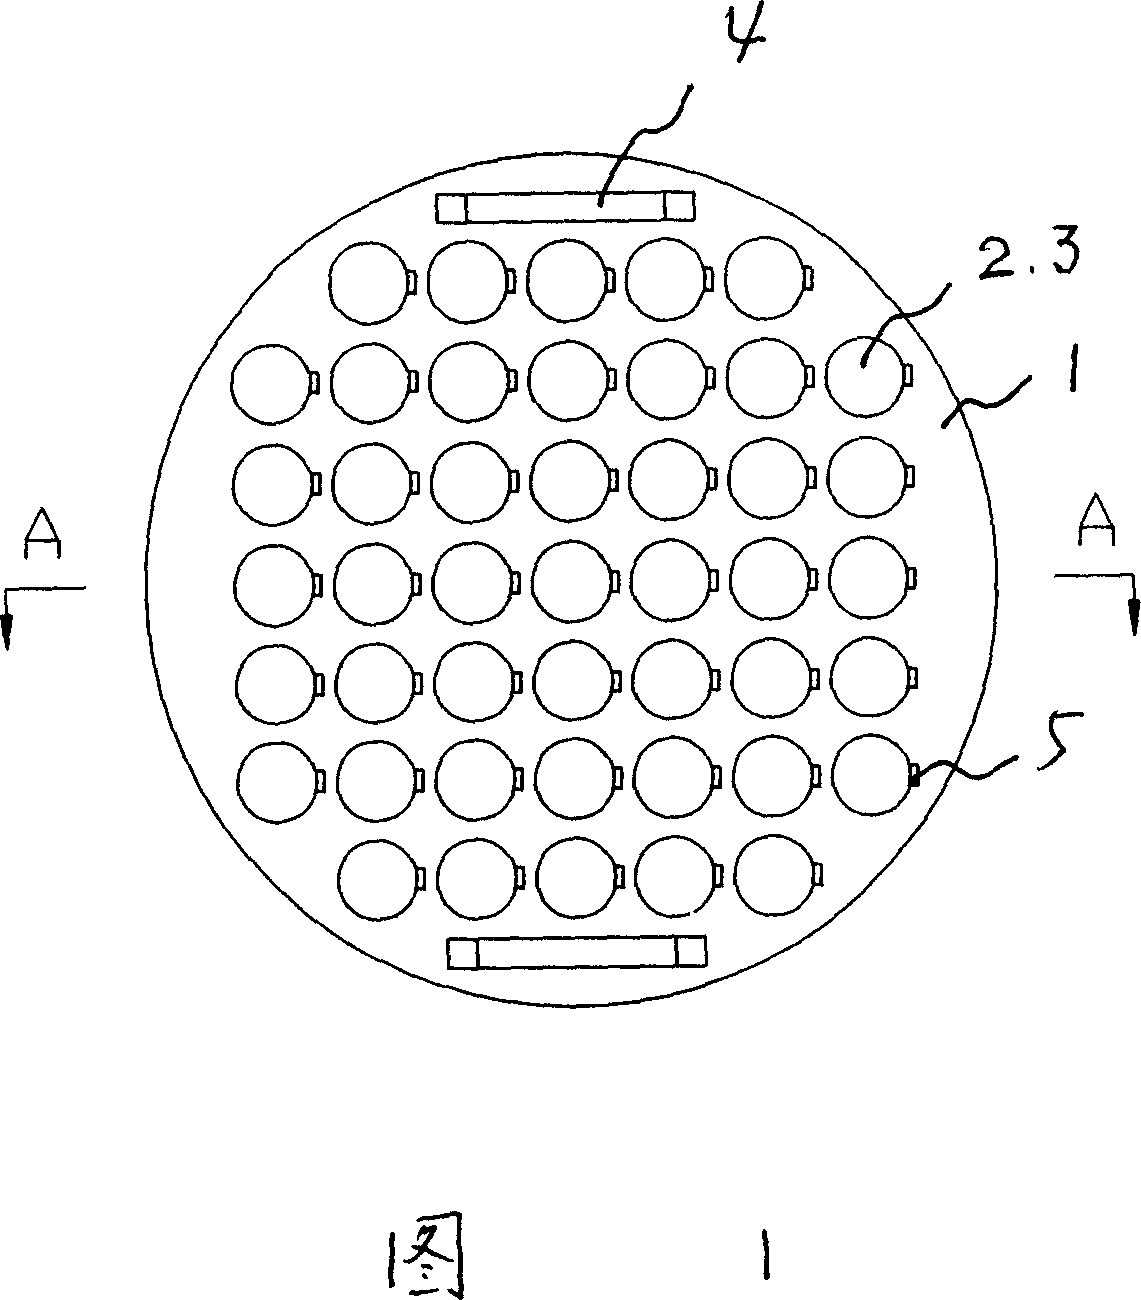 High-density array type cell slide culture apparatus, storage apparatus and experimental apparatus